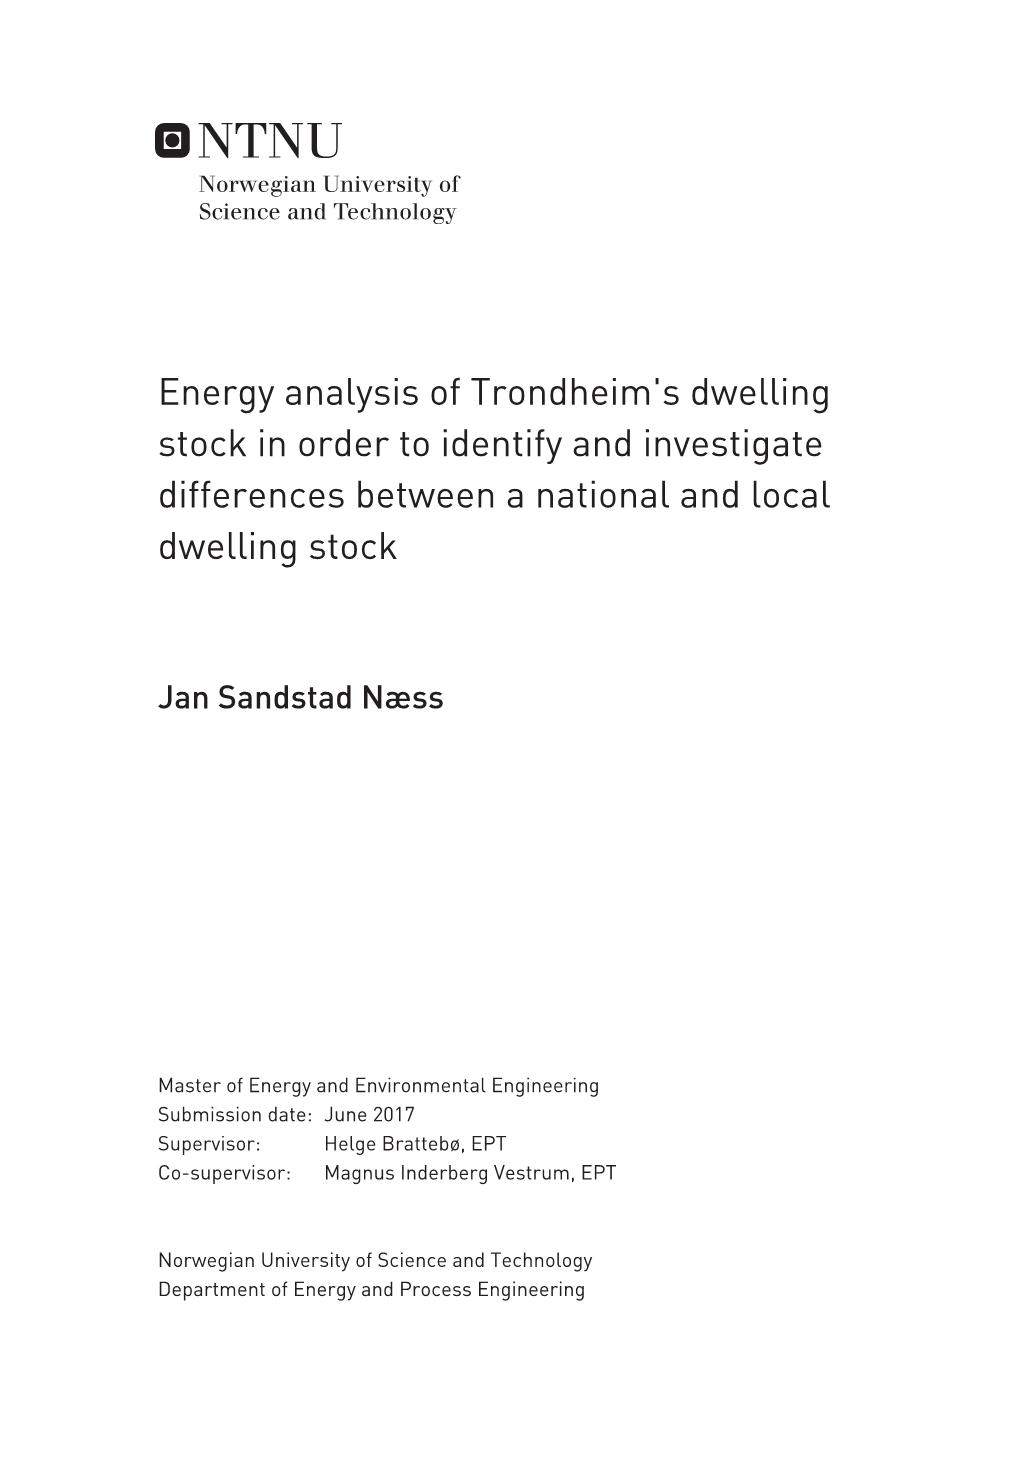 Energy Analysis of Trondheim's Dwelling Stock in Order to Identify and Investigate Differences Between a National and Local Dwelling Stock